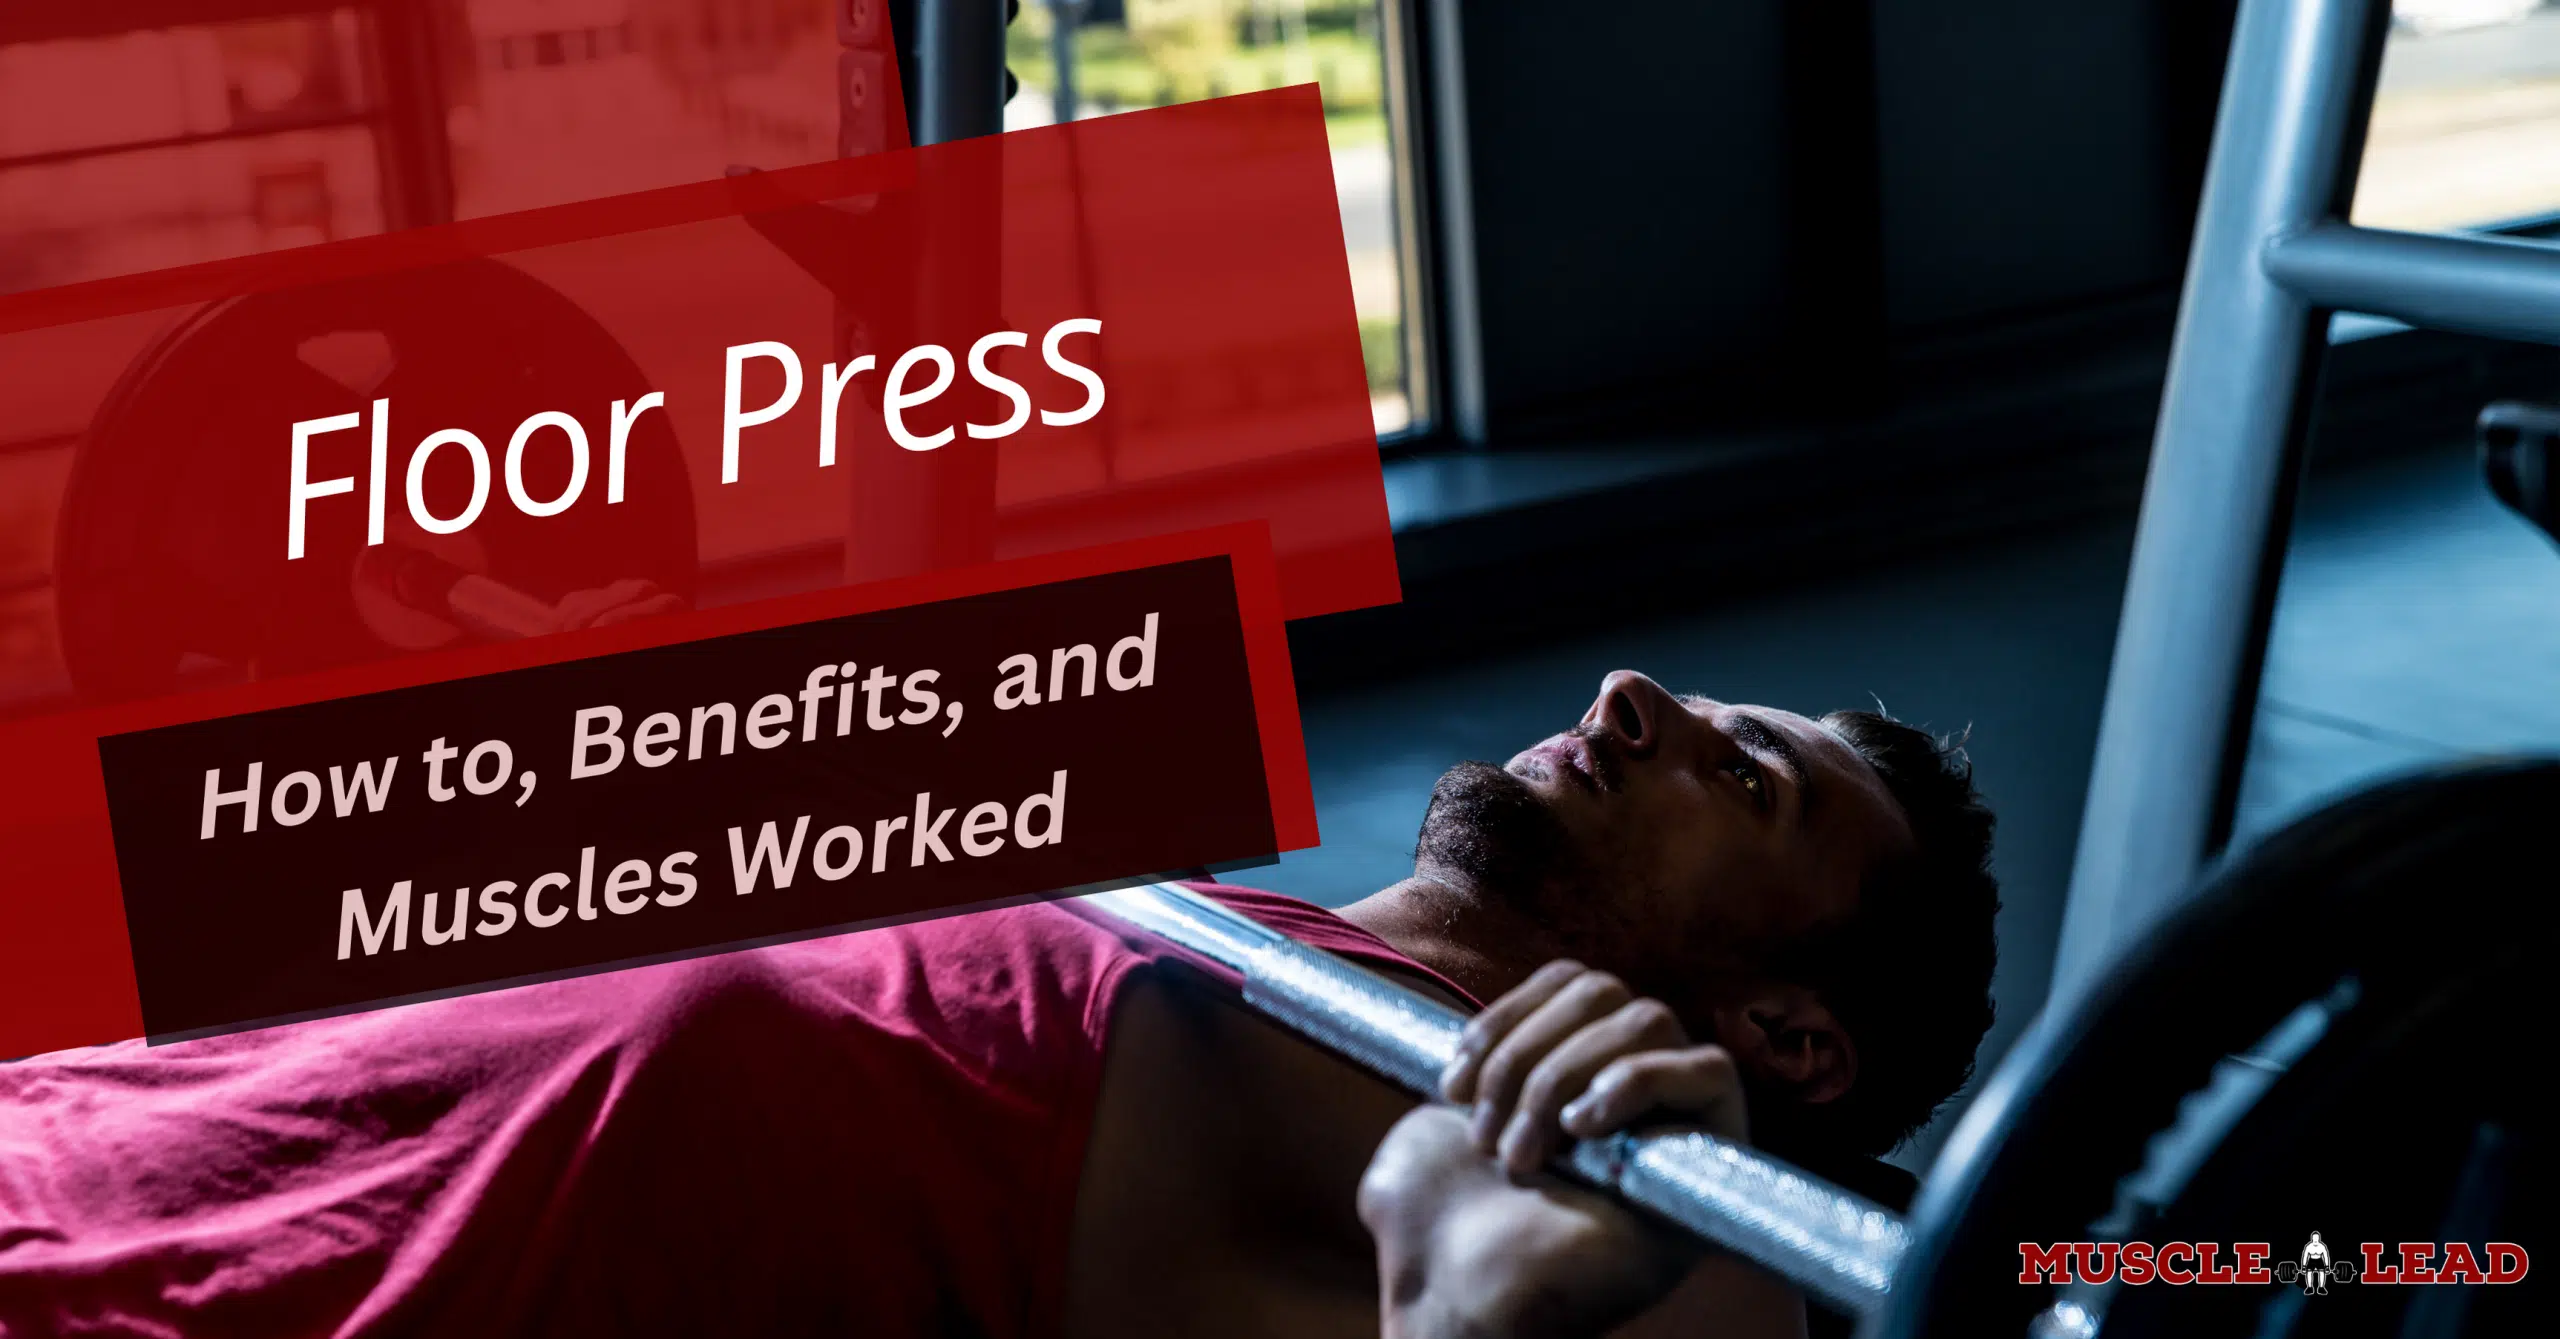 Floor Press: How to, Benefits, and Muscles Worked